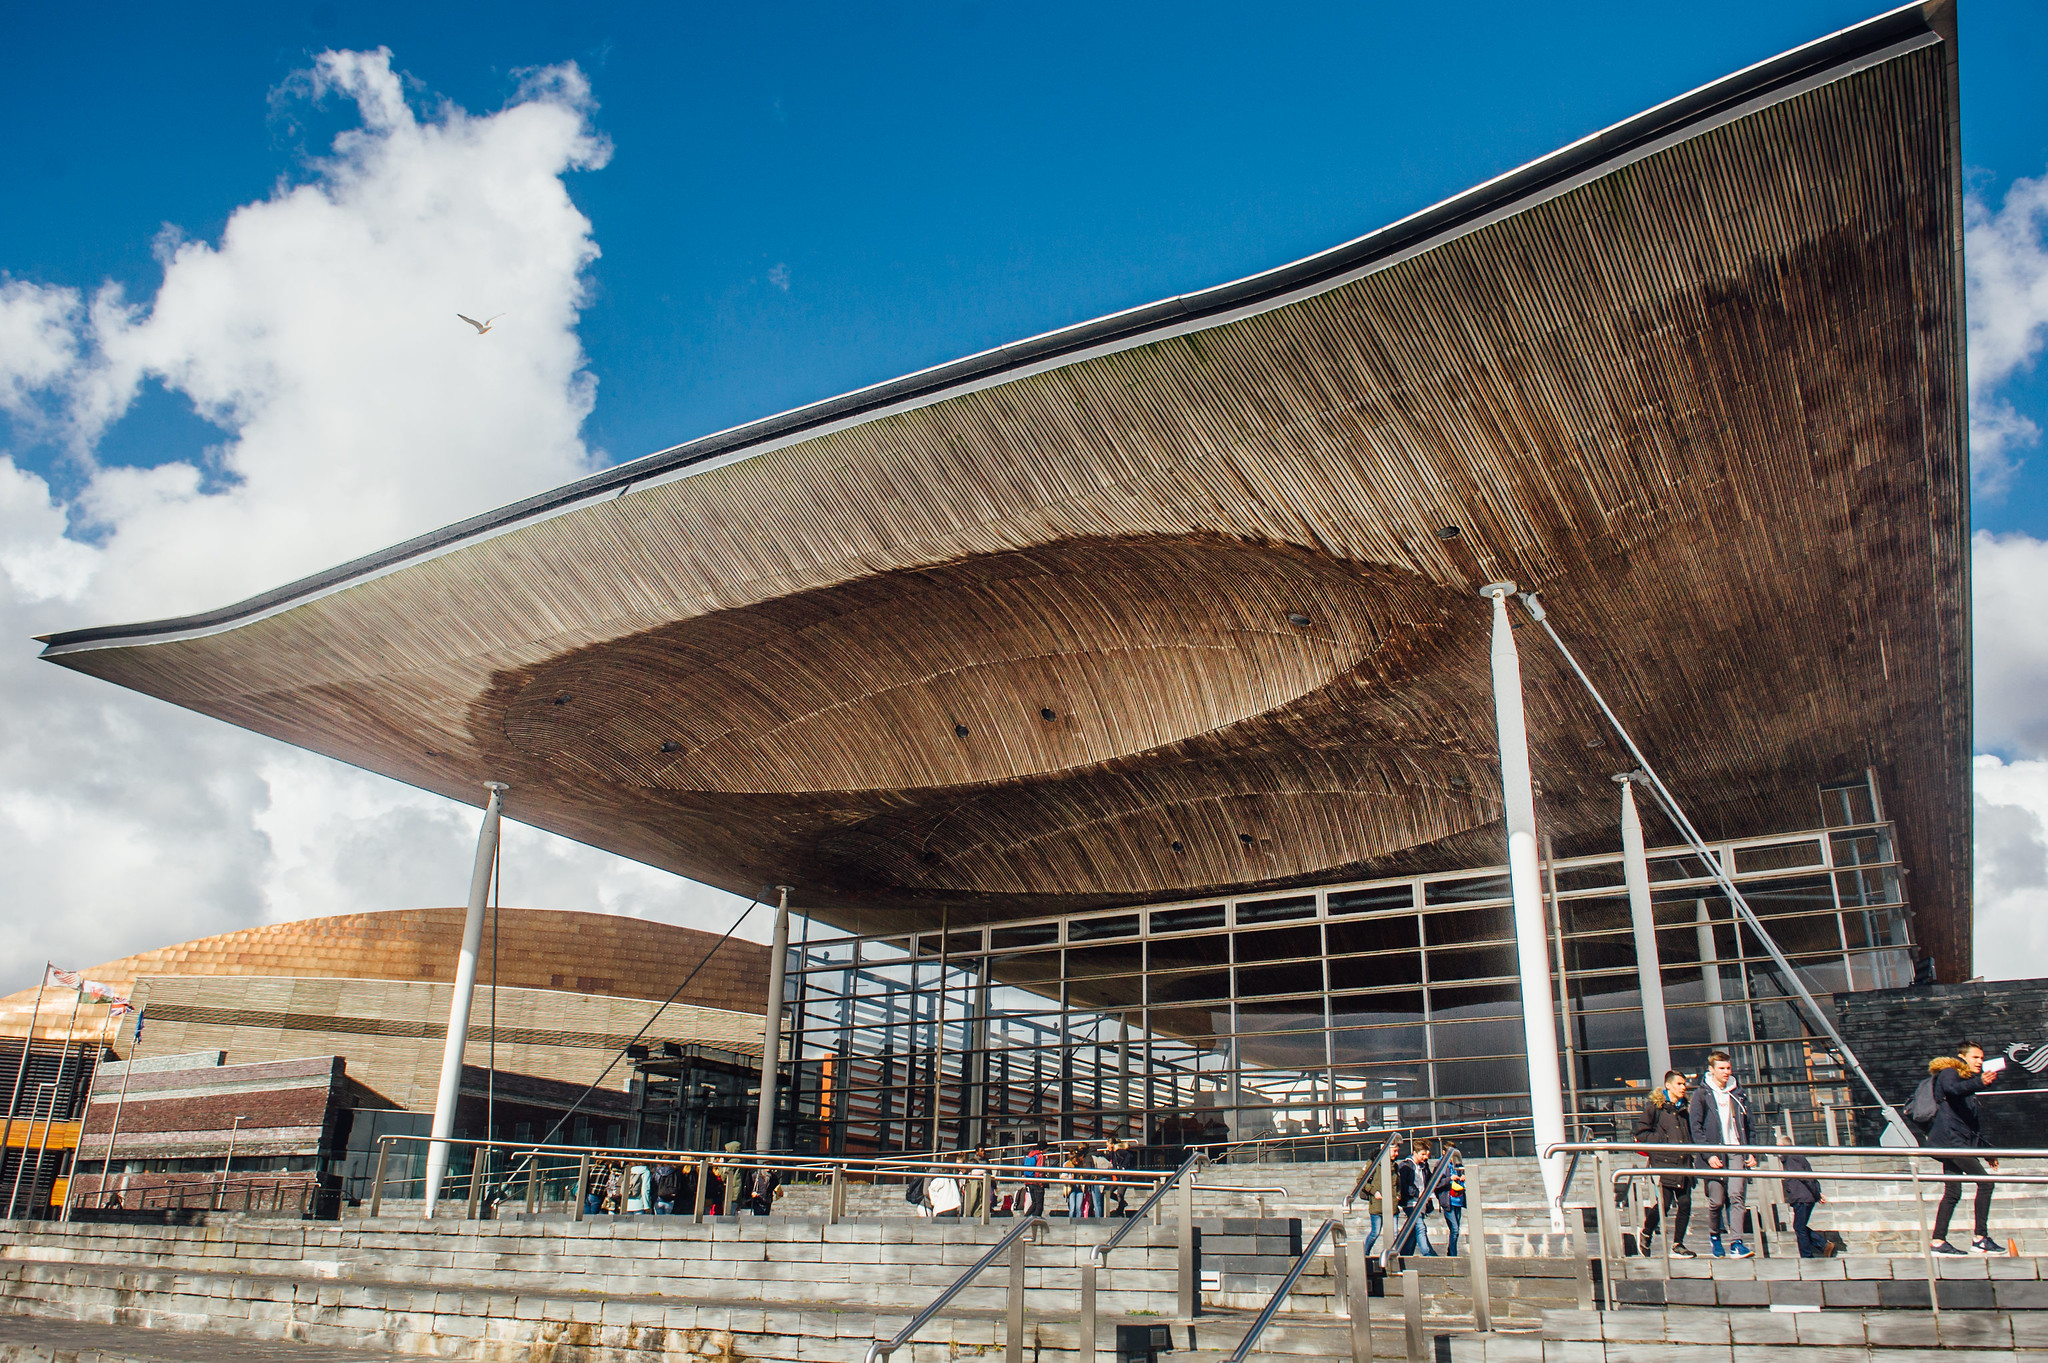 Campaigners welcome long overdue step forward for Welsh democracy with Senedd Reform.The image shows the Senedd seen from the outside under a clear blue sky. 